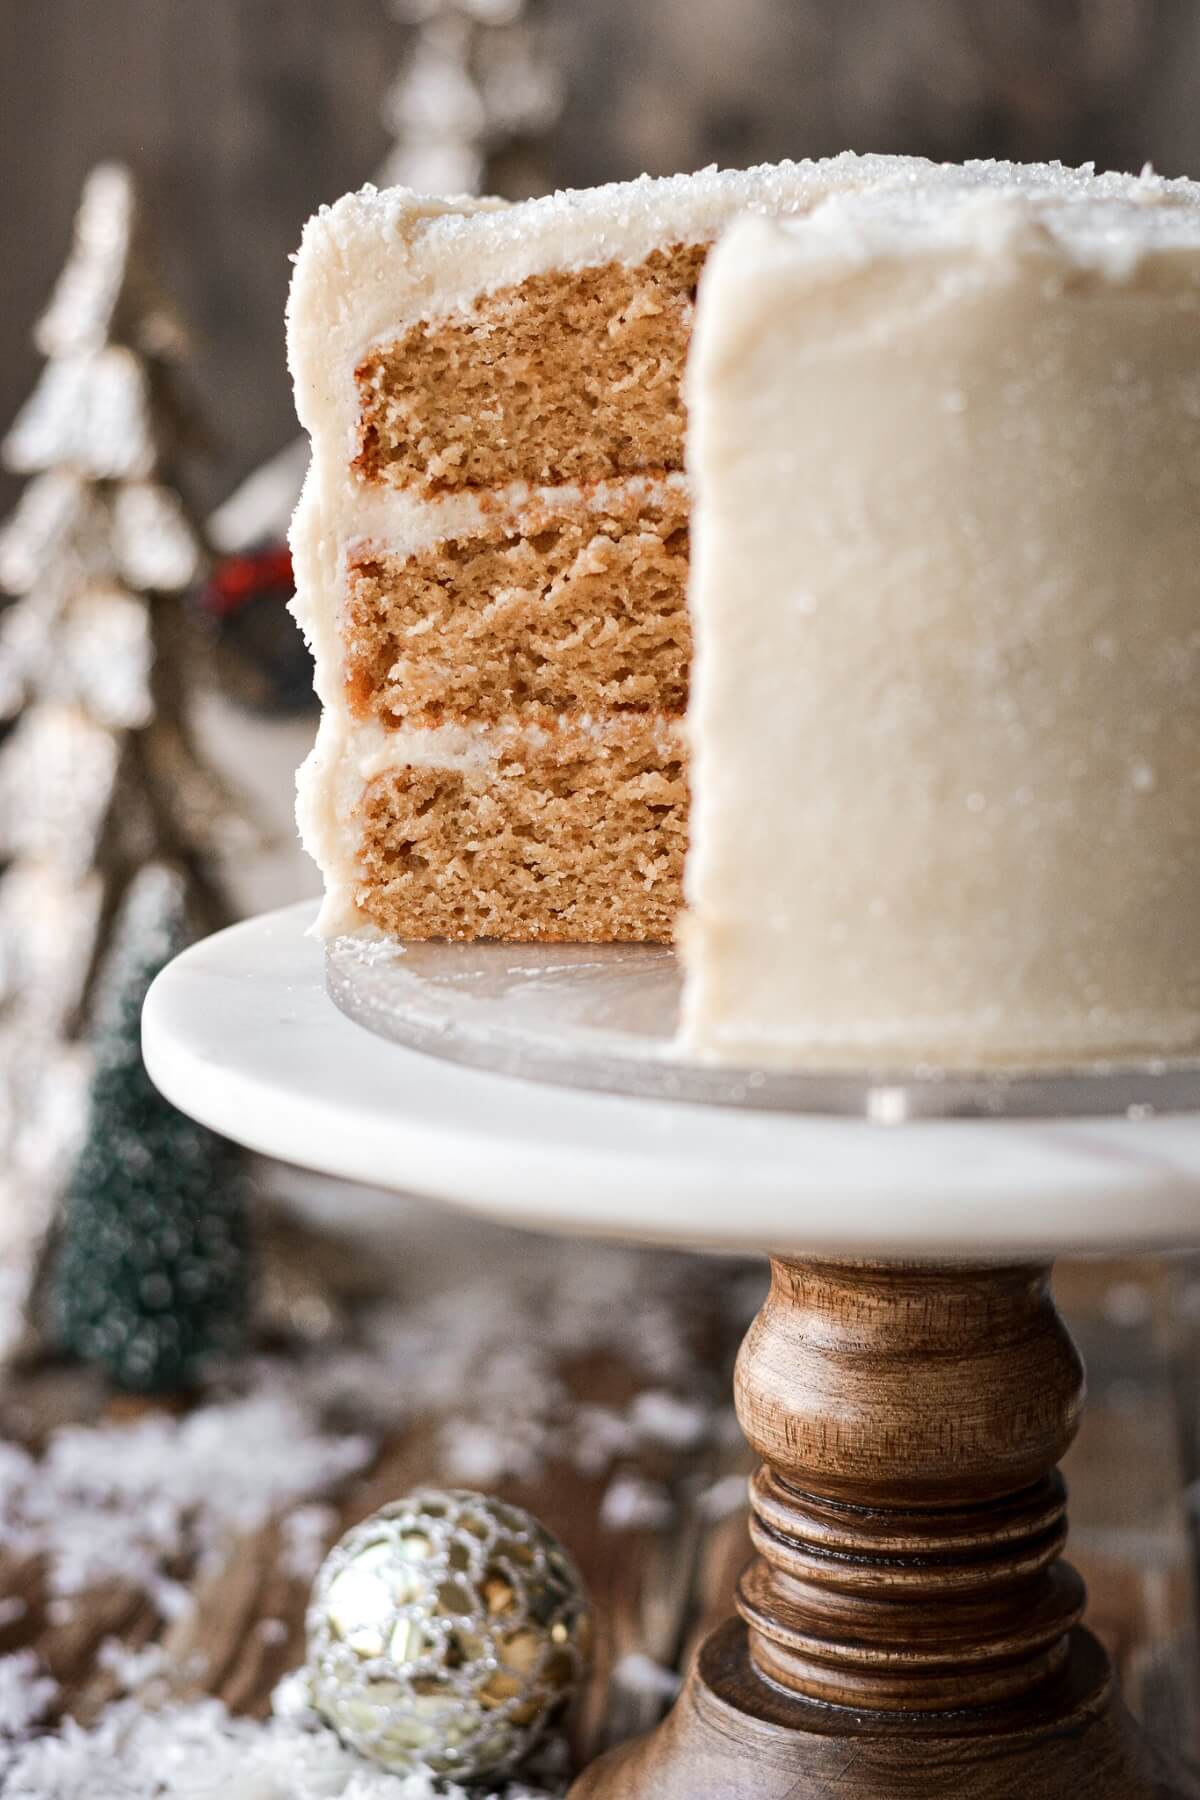 Gingerbread cake with a slice cut.